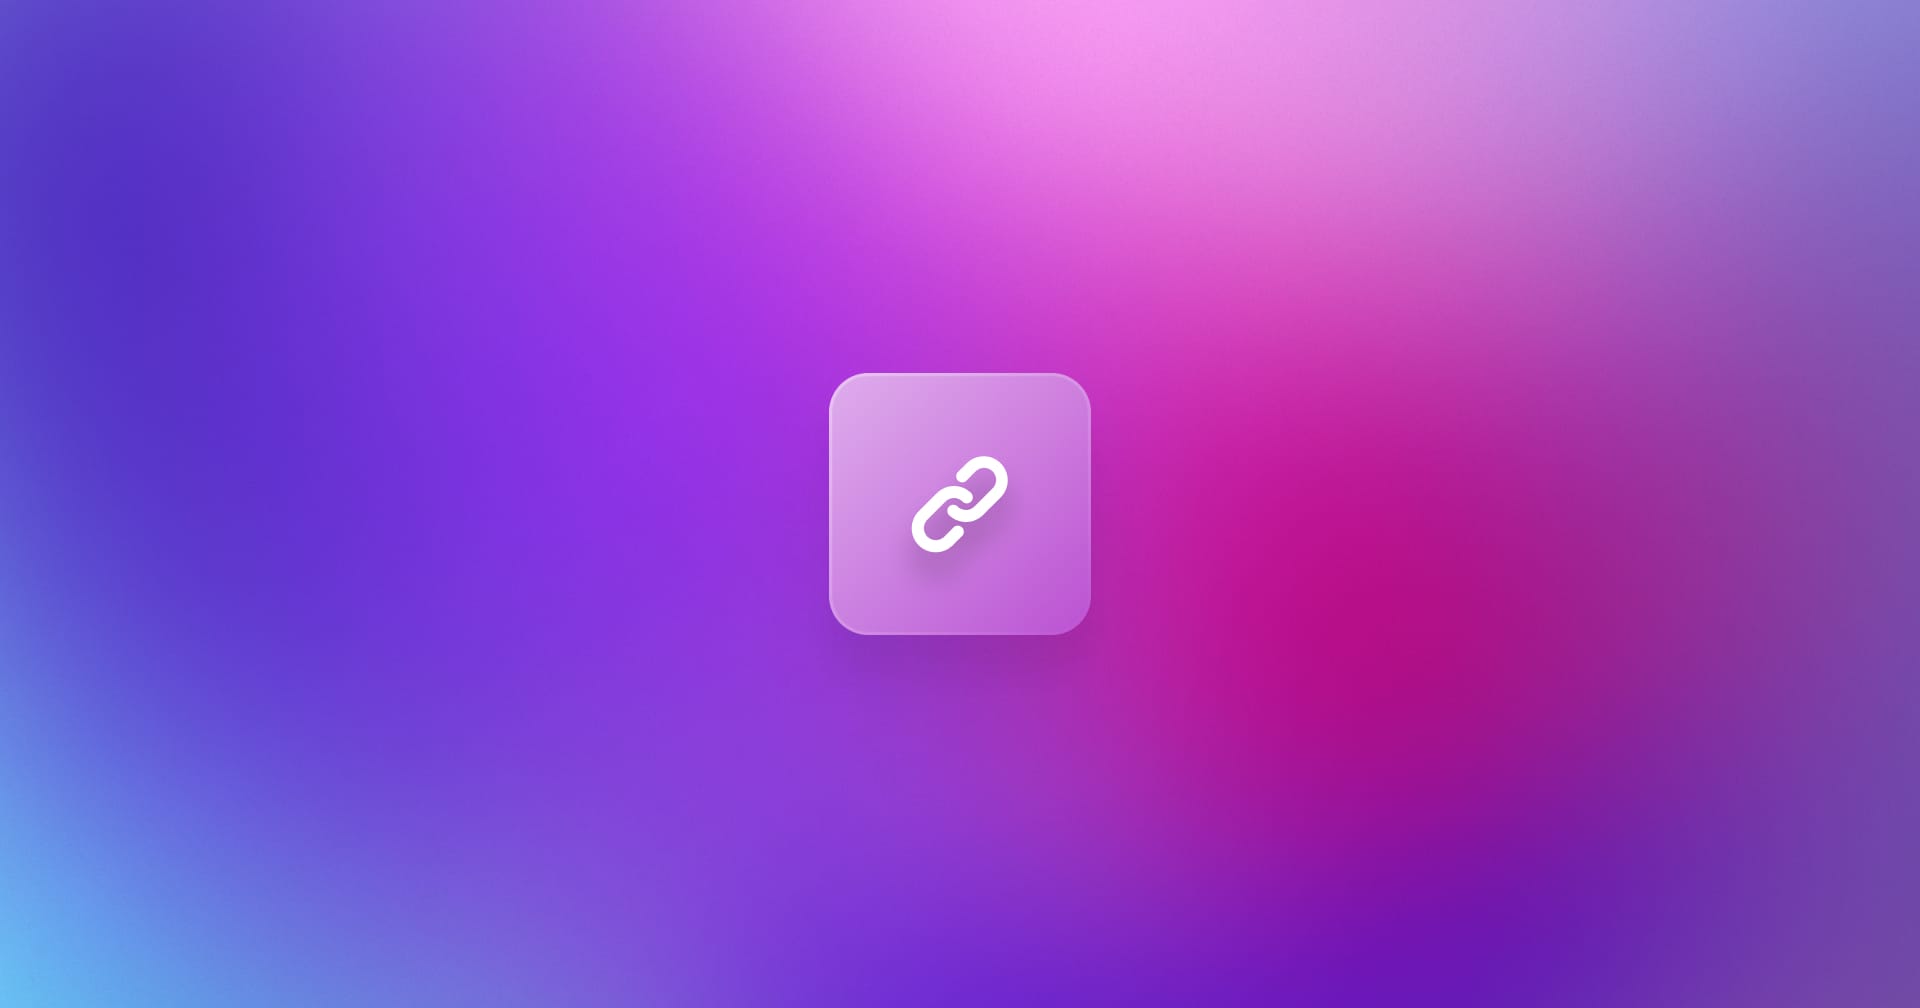 A link icon with a gradient background